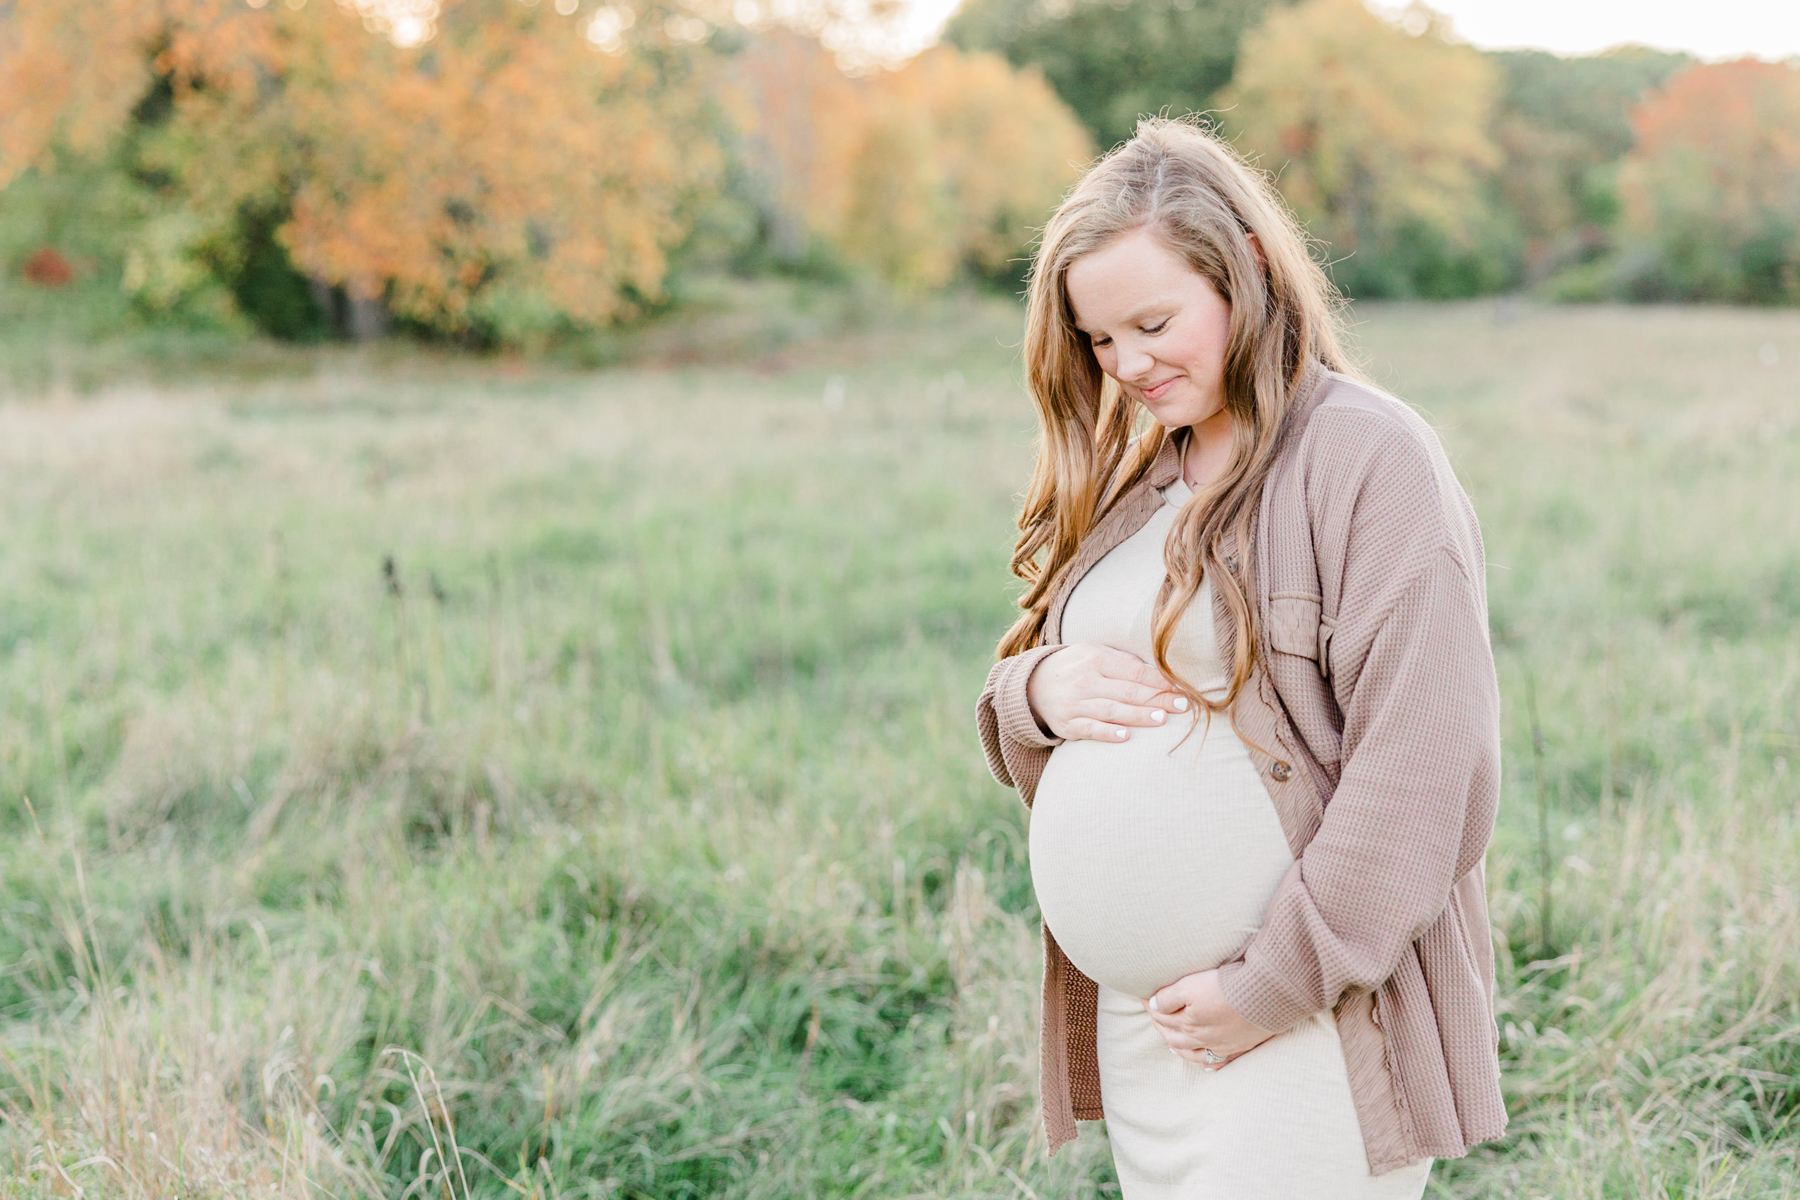 Mother to be stands in a grassy field wearing a brown sweater holds her bump Joyful Birthing